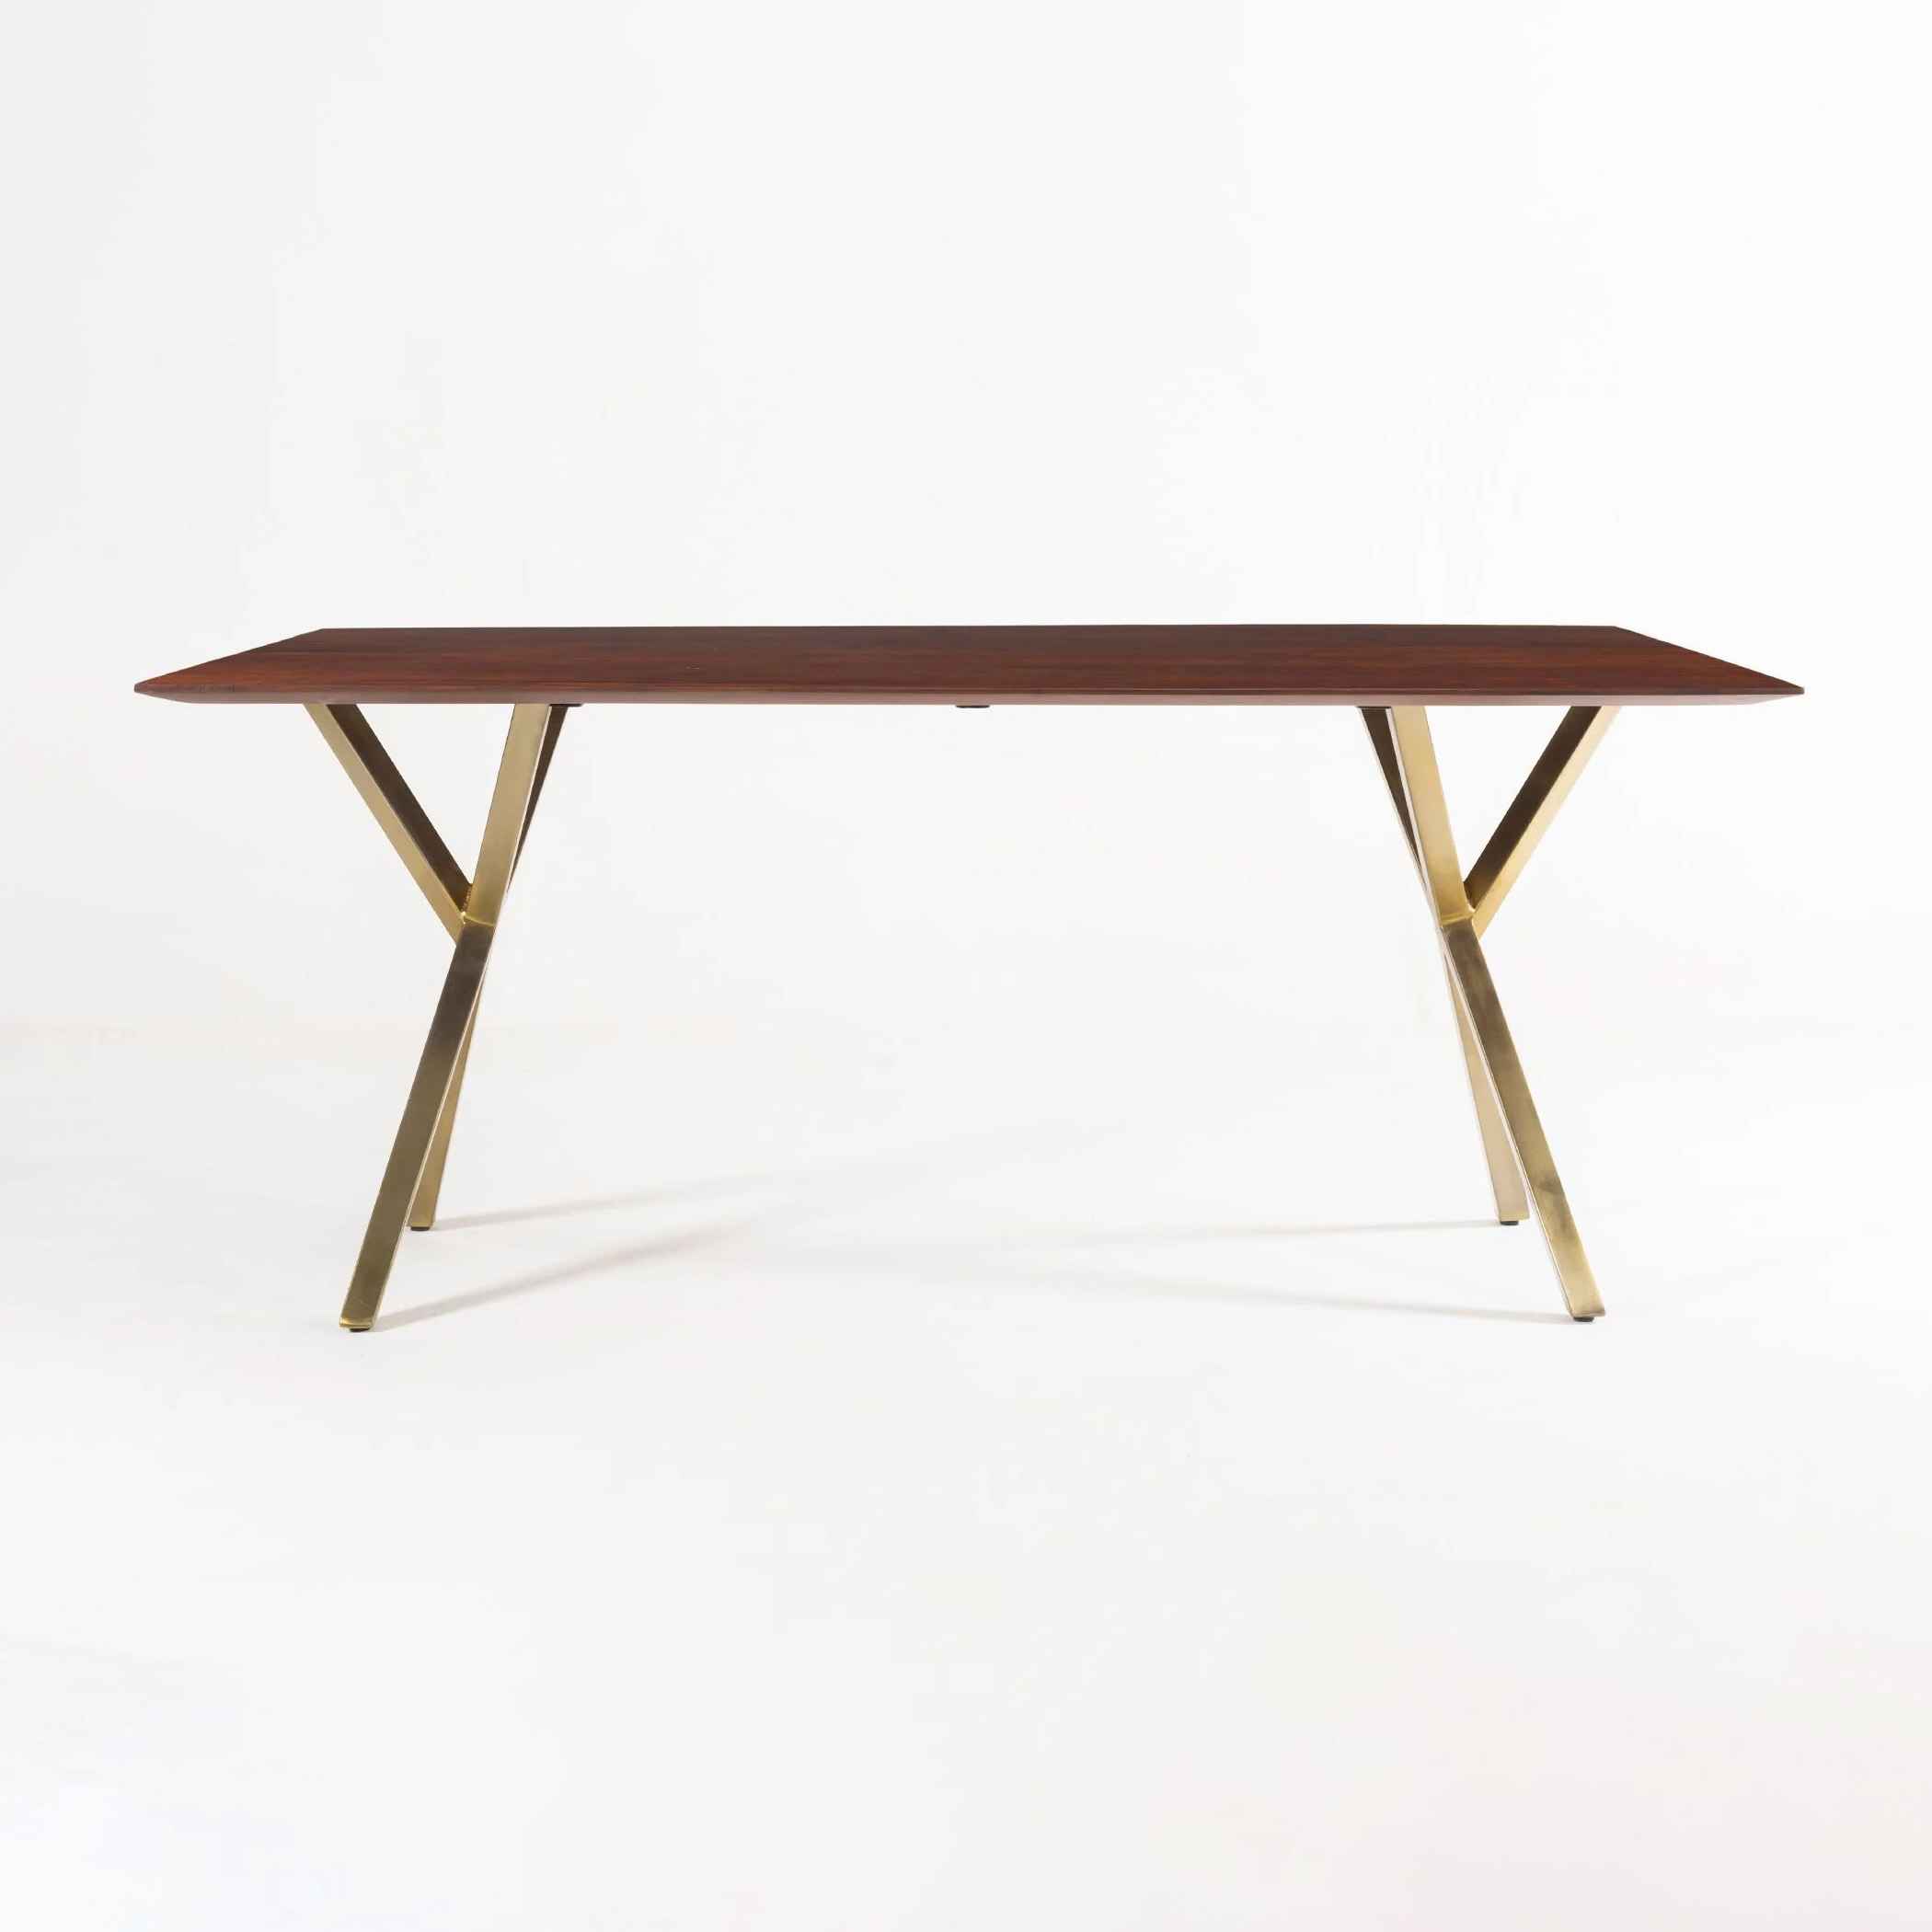 Nton Solid Wood Dining Table